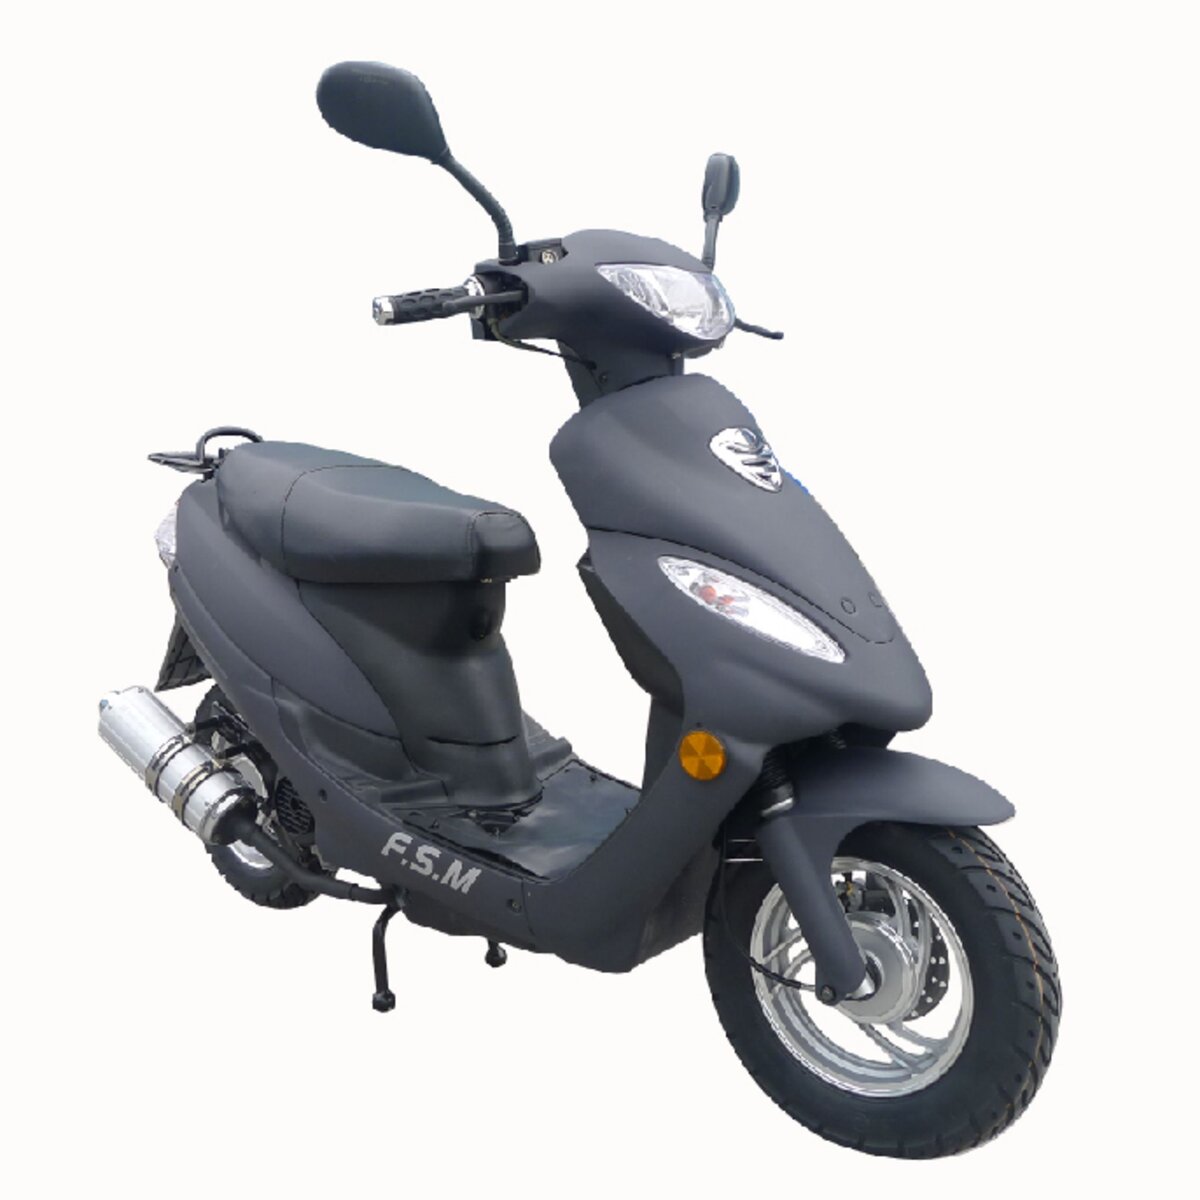 F.S.M Scooter 50 cc 4 temps 